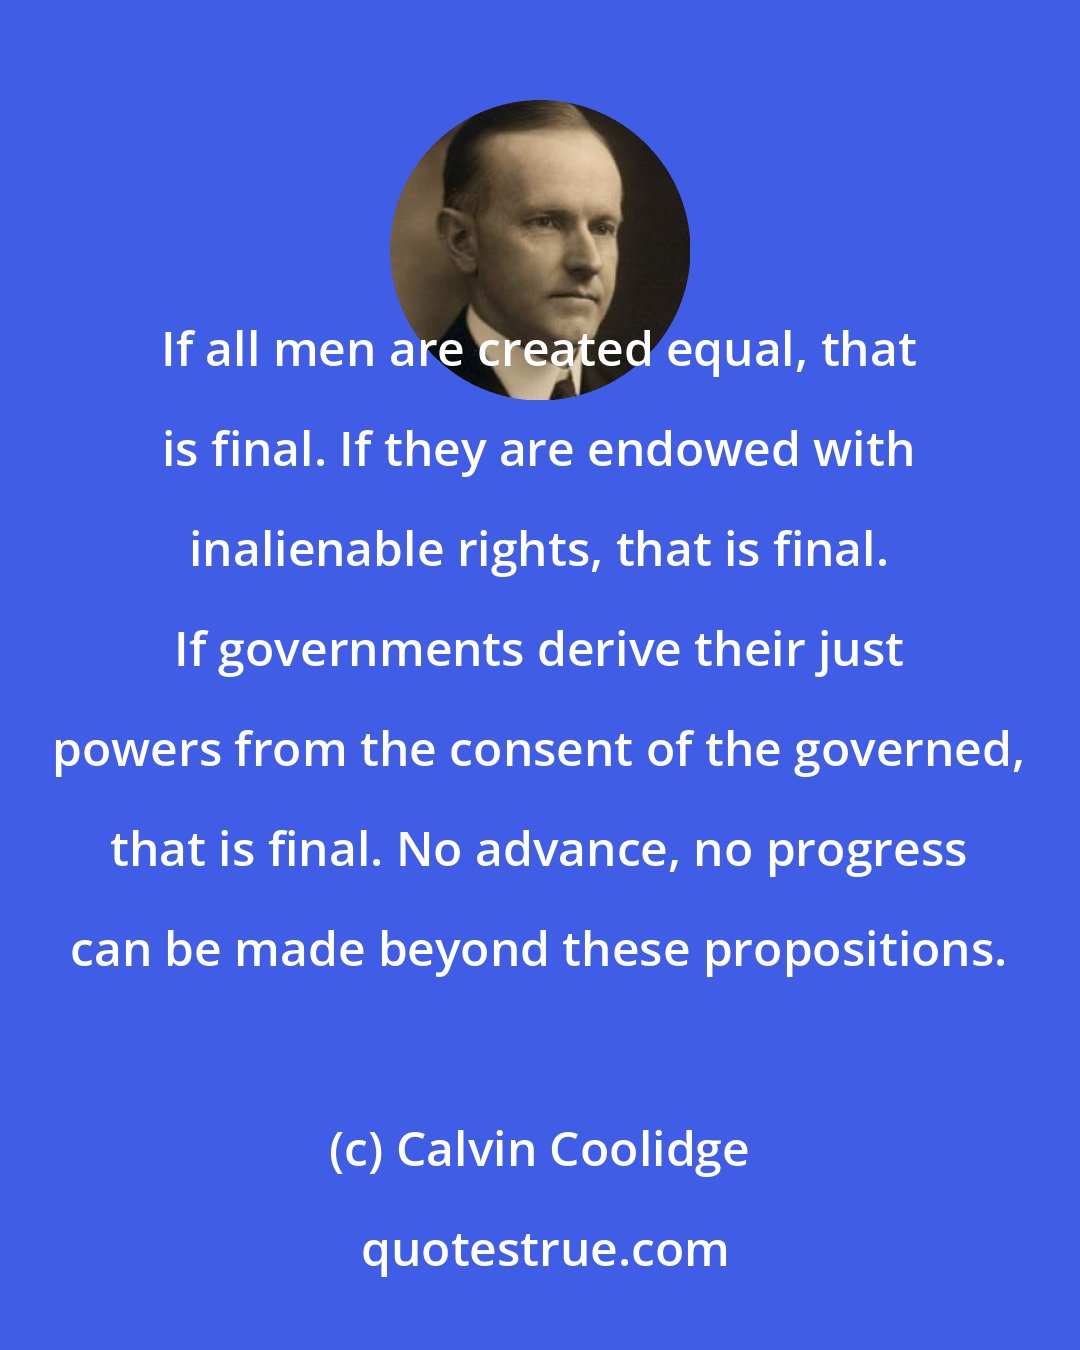 Calvin Coolidge: If all men are created equal, that is final. If they are endowed with inalienable rights, that is final. If governments derive their just powers from the consent of the governed, that is final. No advance, no progress can be made beyond these propositions.